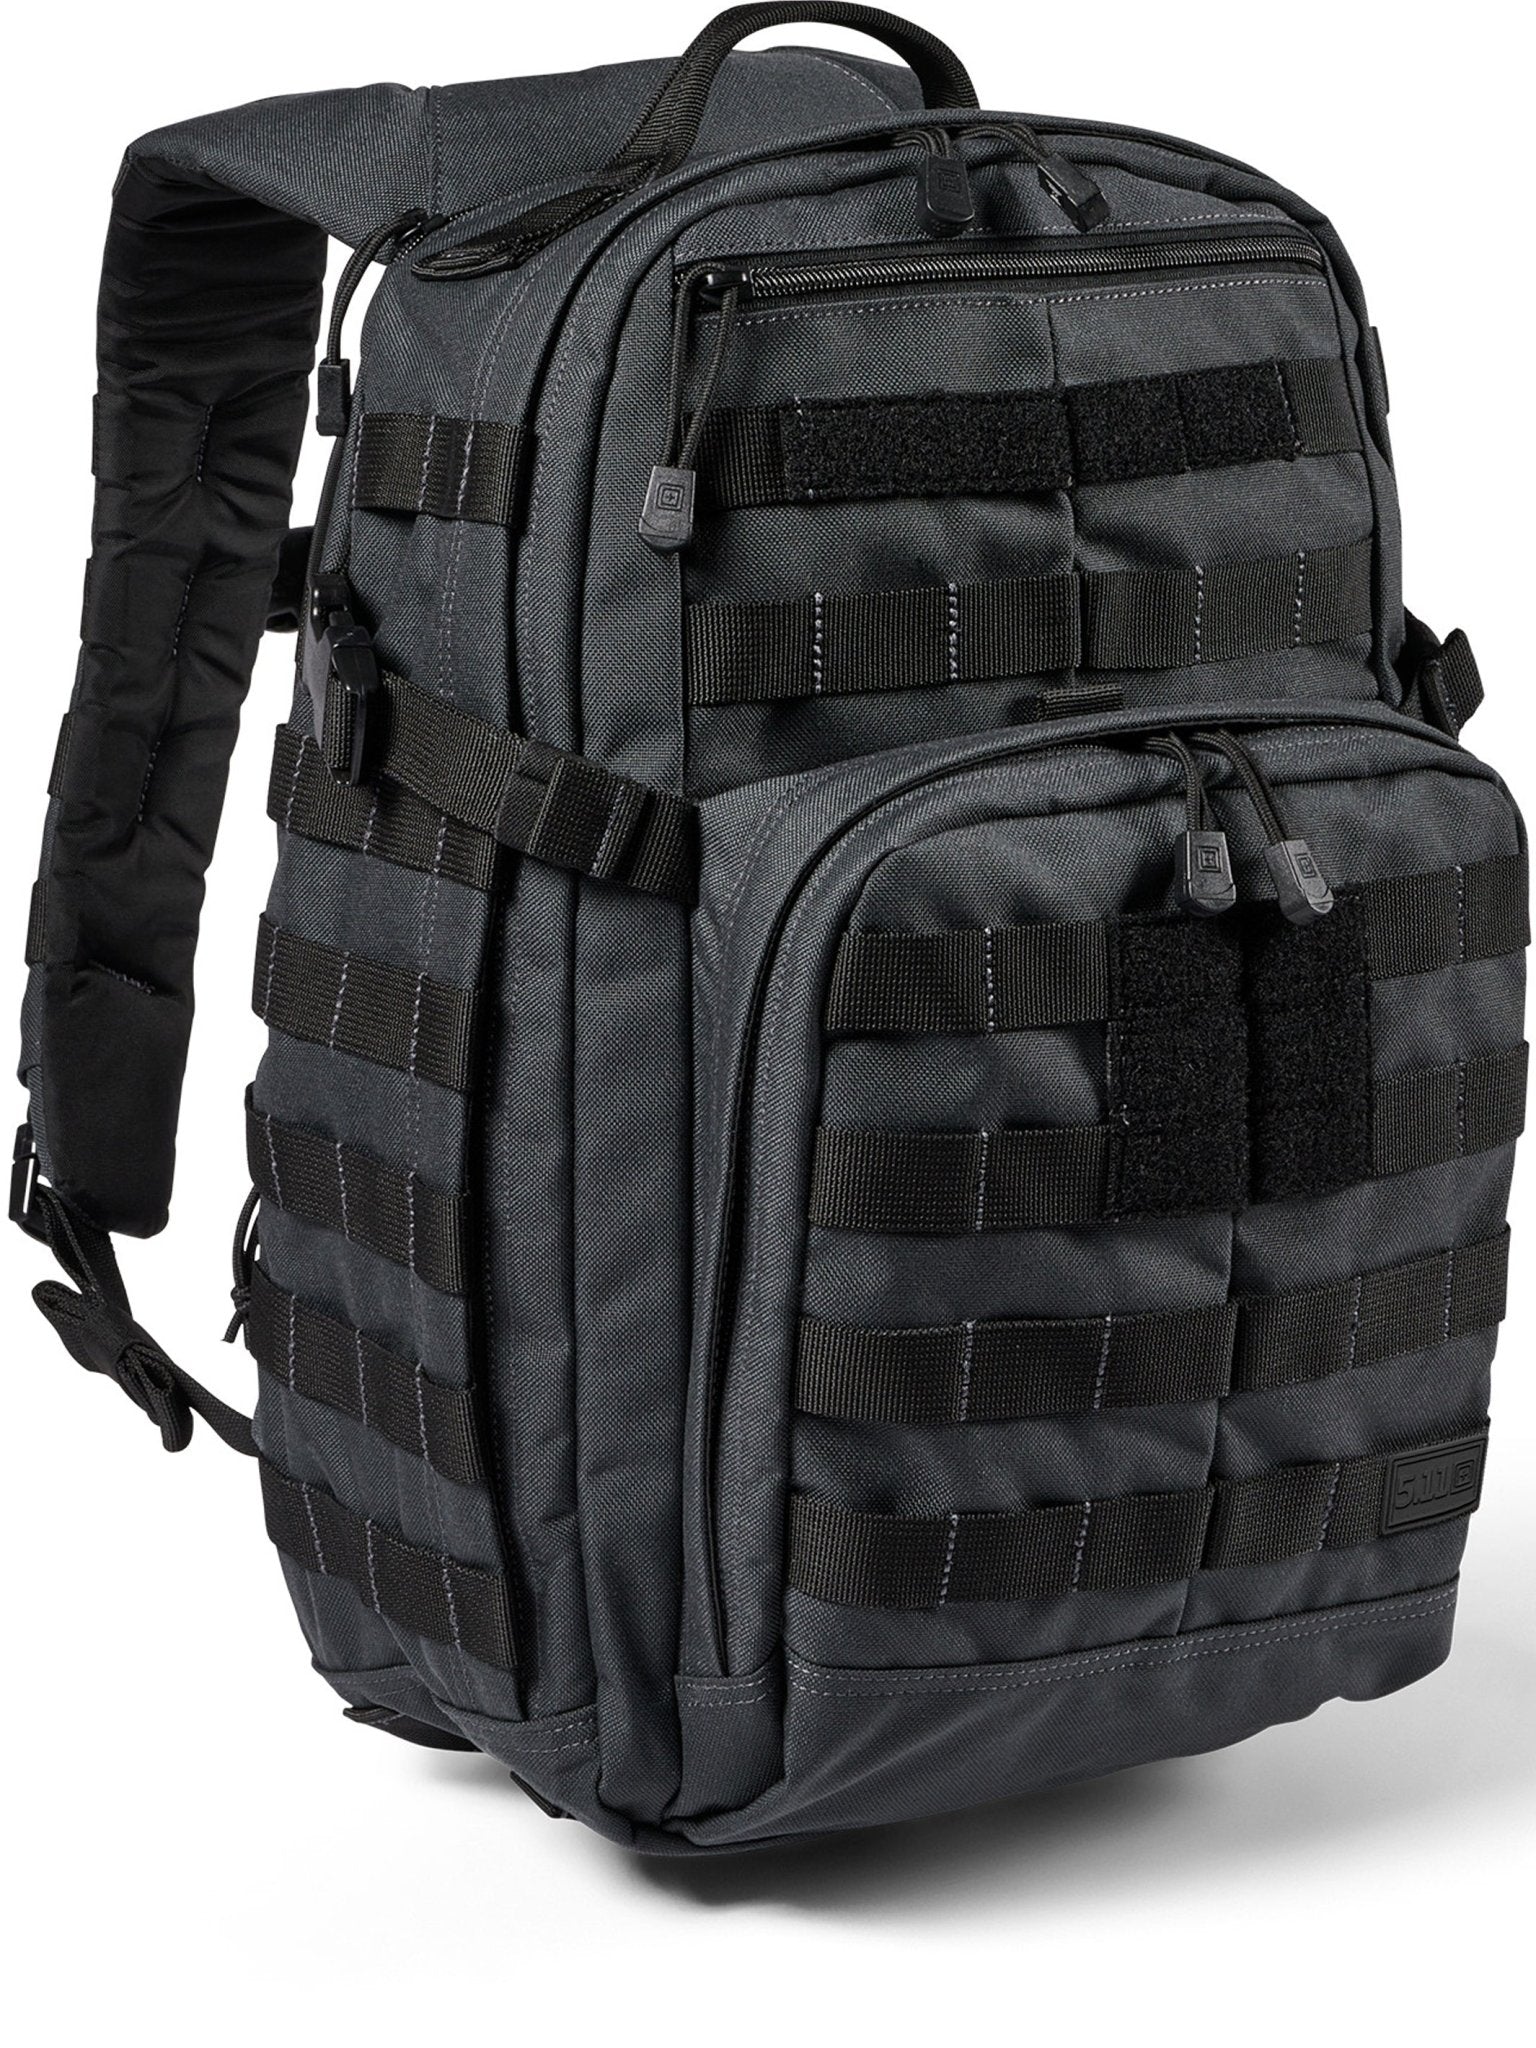 4elementsclothing5.11 Tactical5.11 Tactical - 5.11 Tactical Rush 12 2.0 Backpack with Laptop compartment - Style 56561Bag56561-026